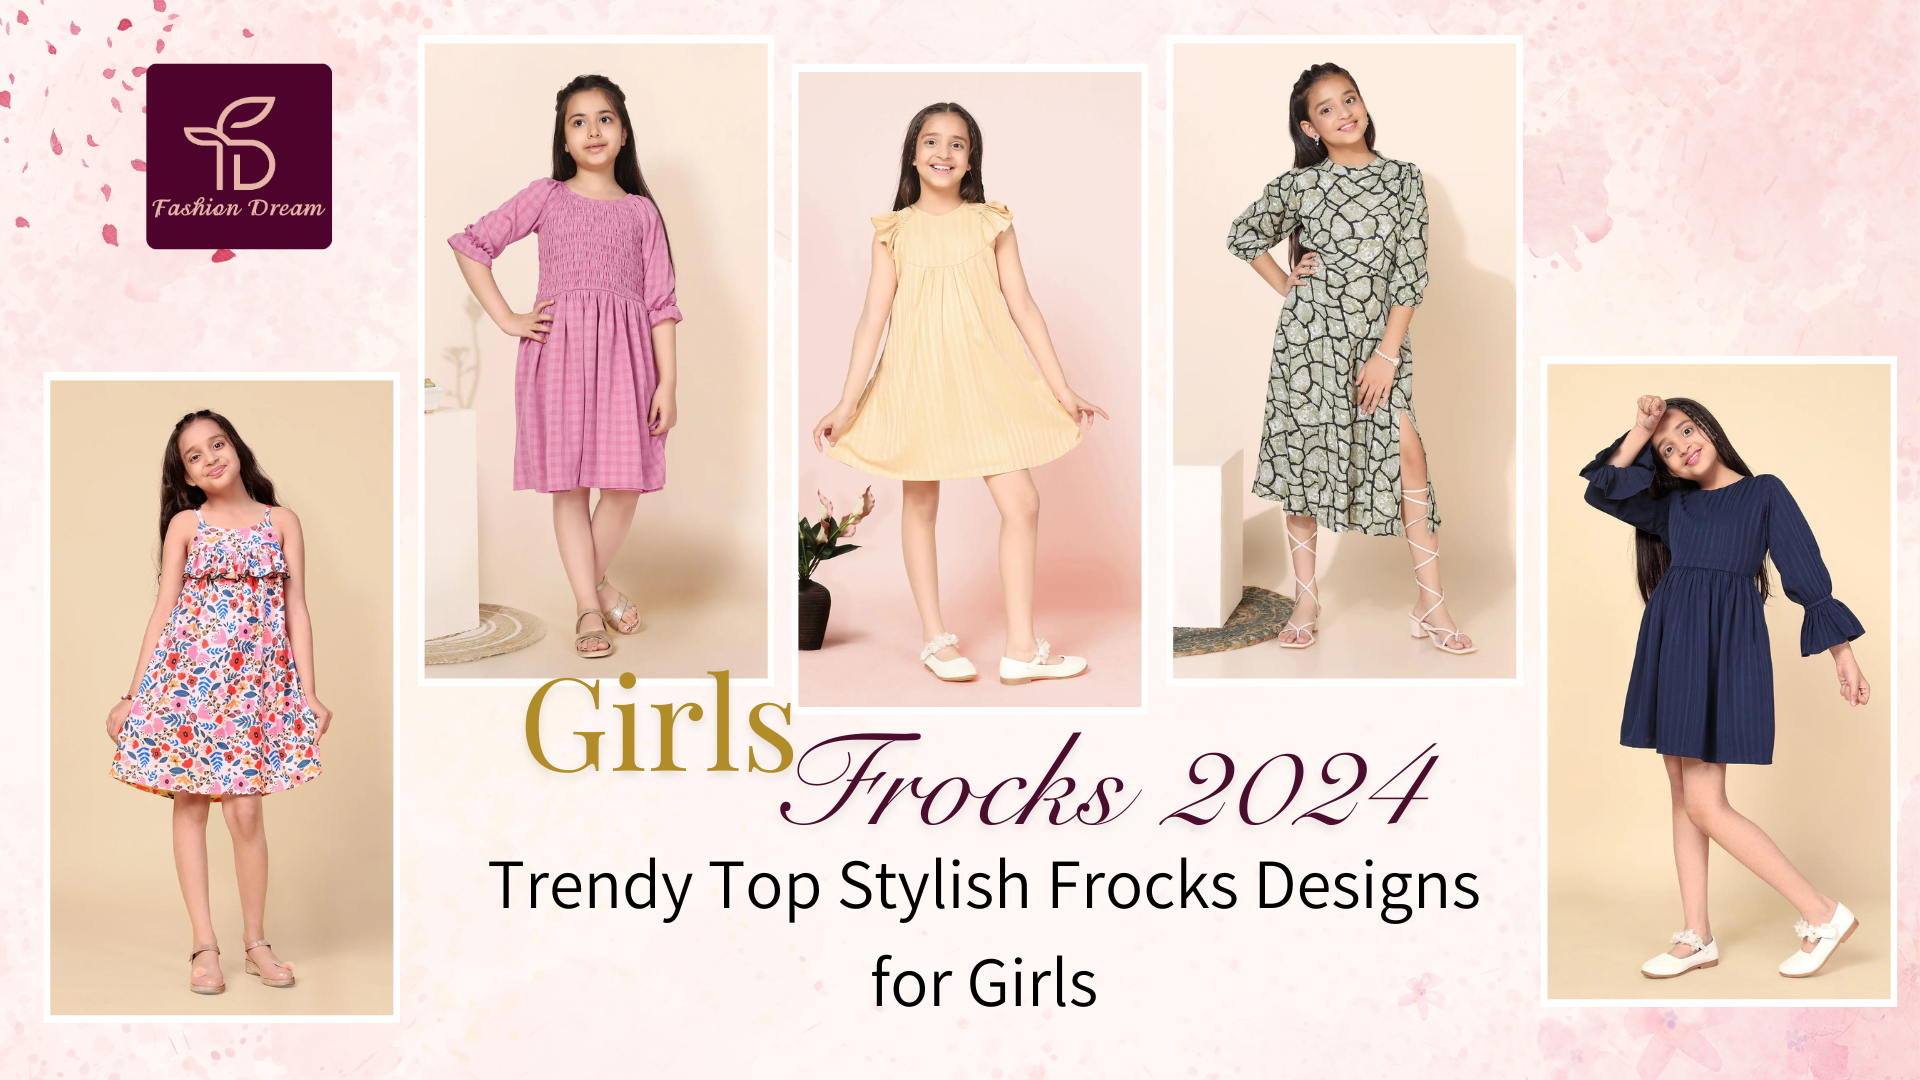 Trendy Top Stylish Frocks Designs for Girls